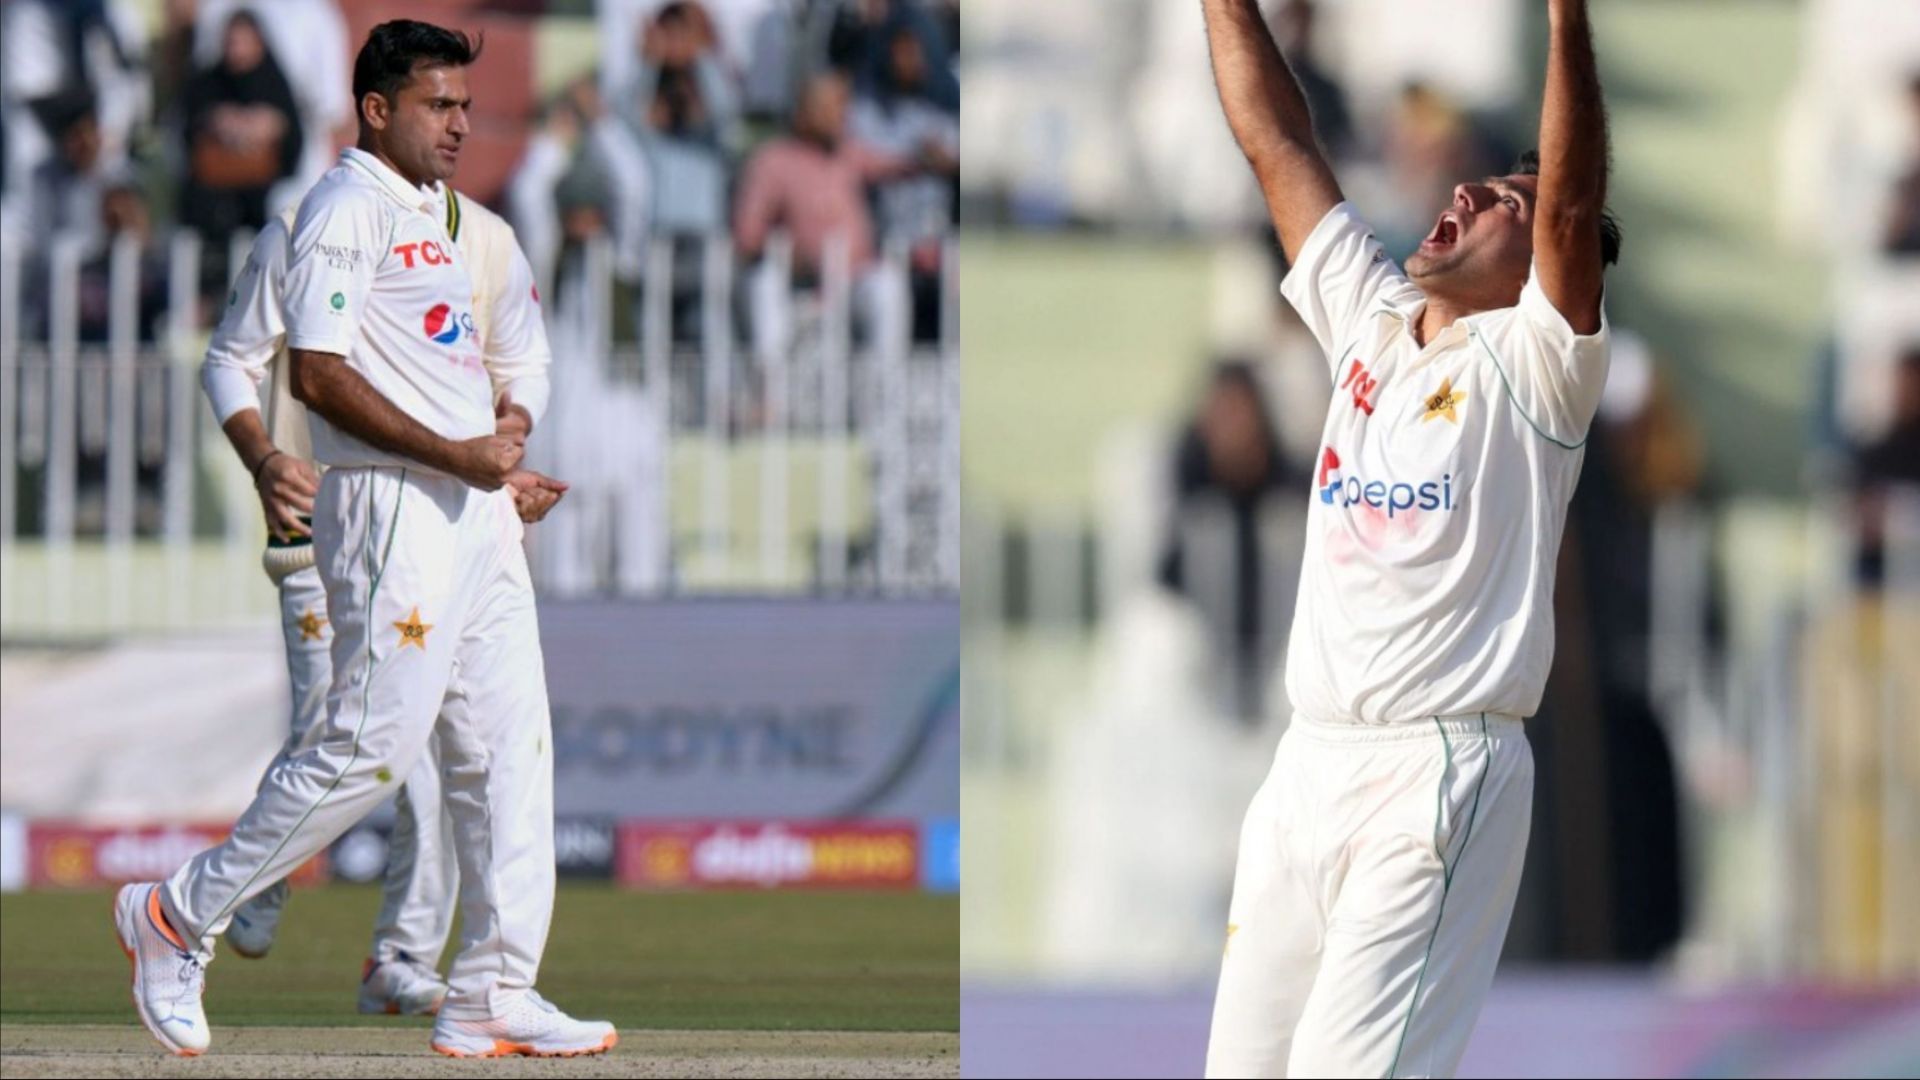 Zahid Mahmood scalped four wickets (Image: Getty/Twitter)